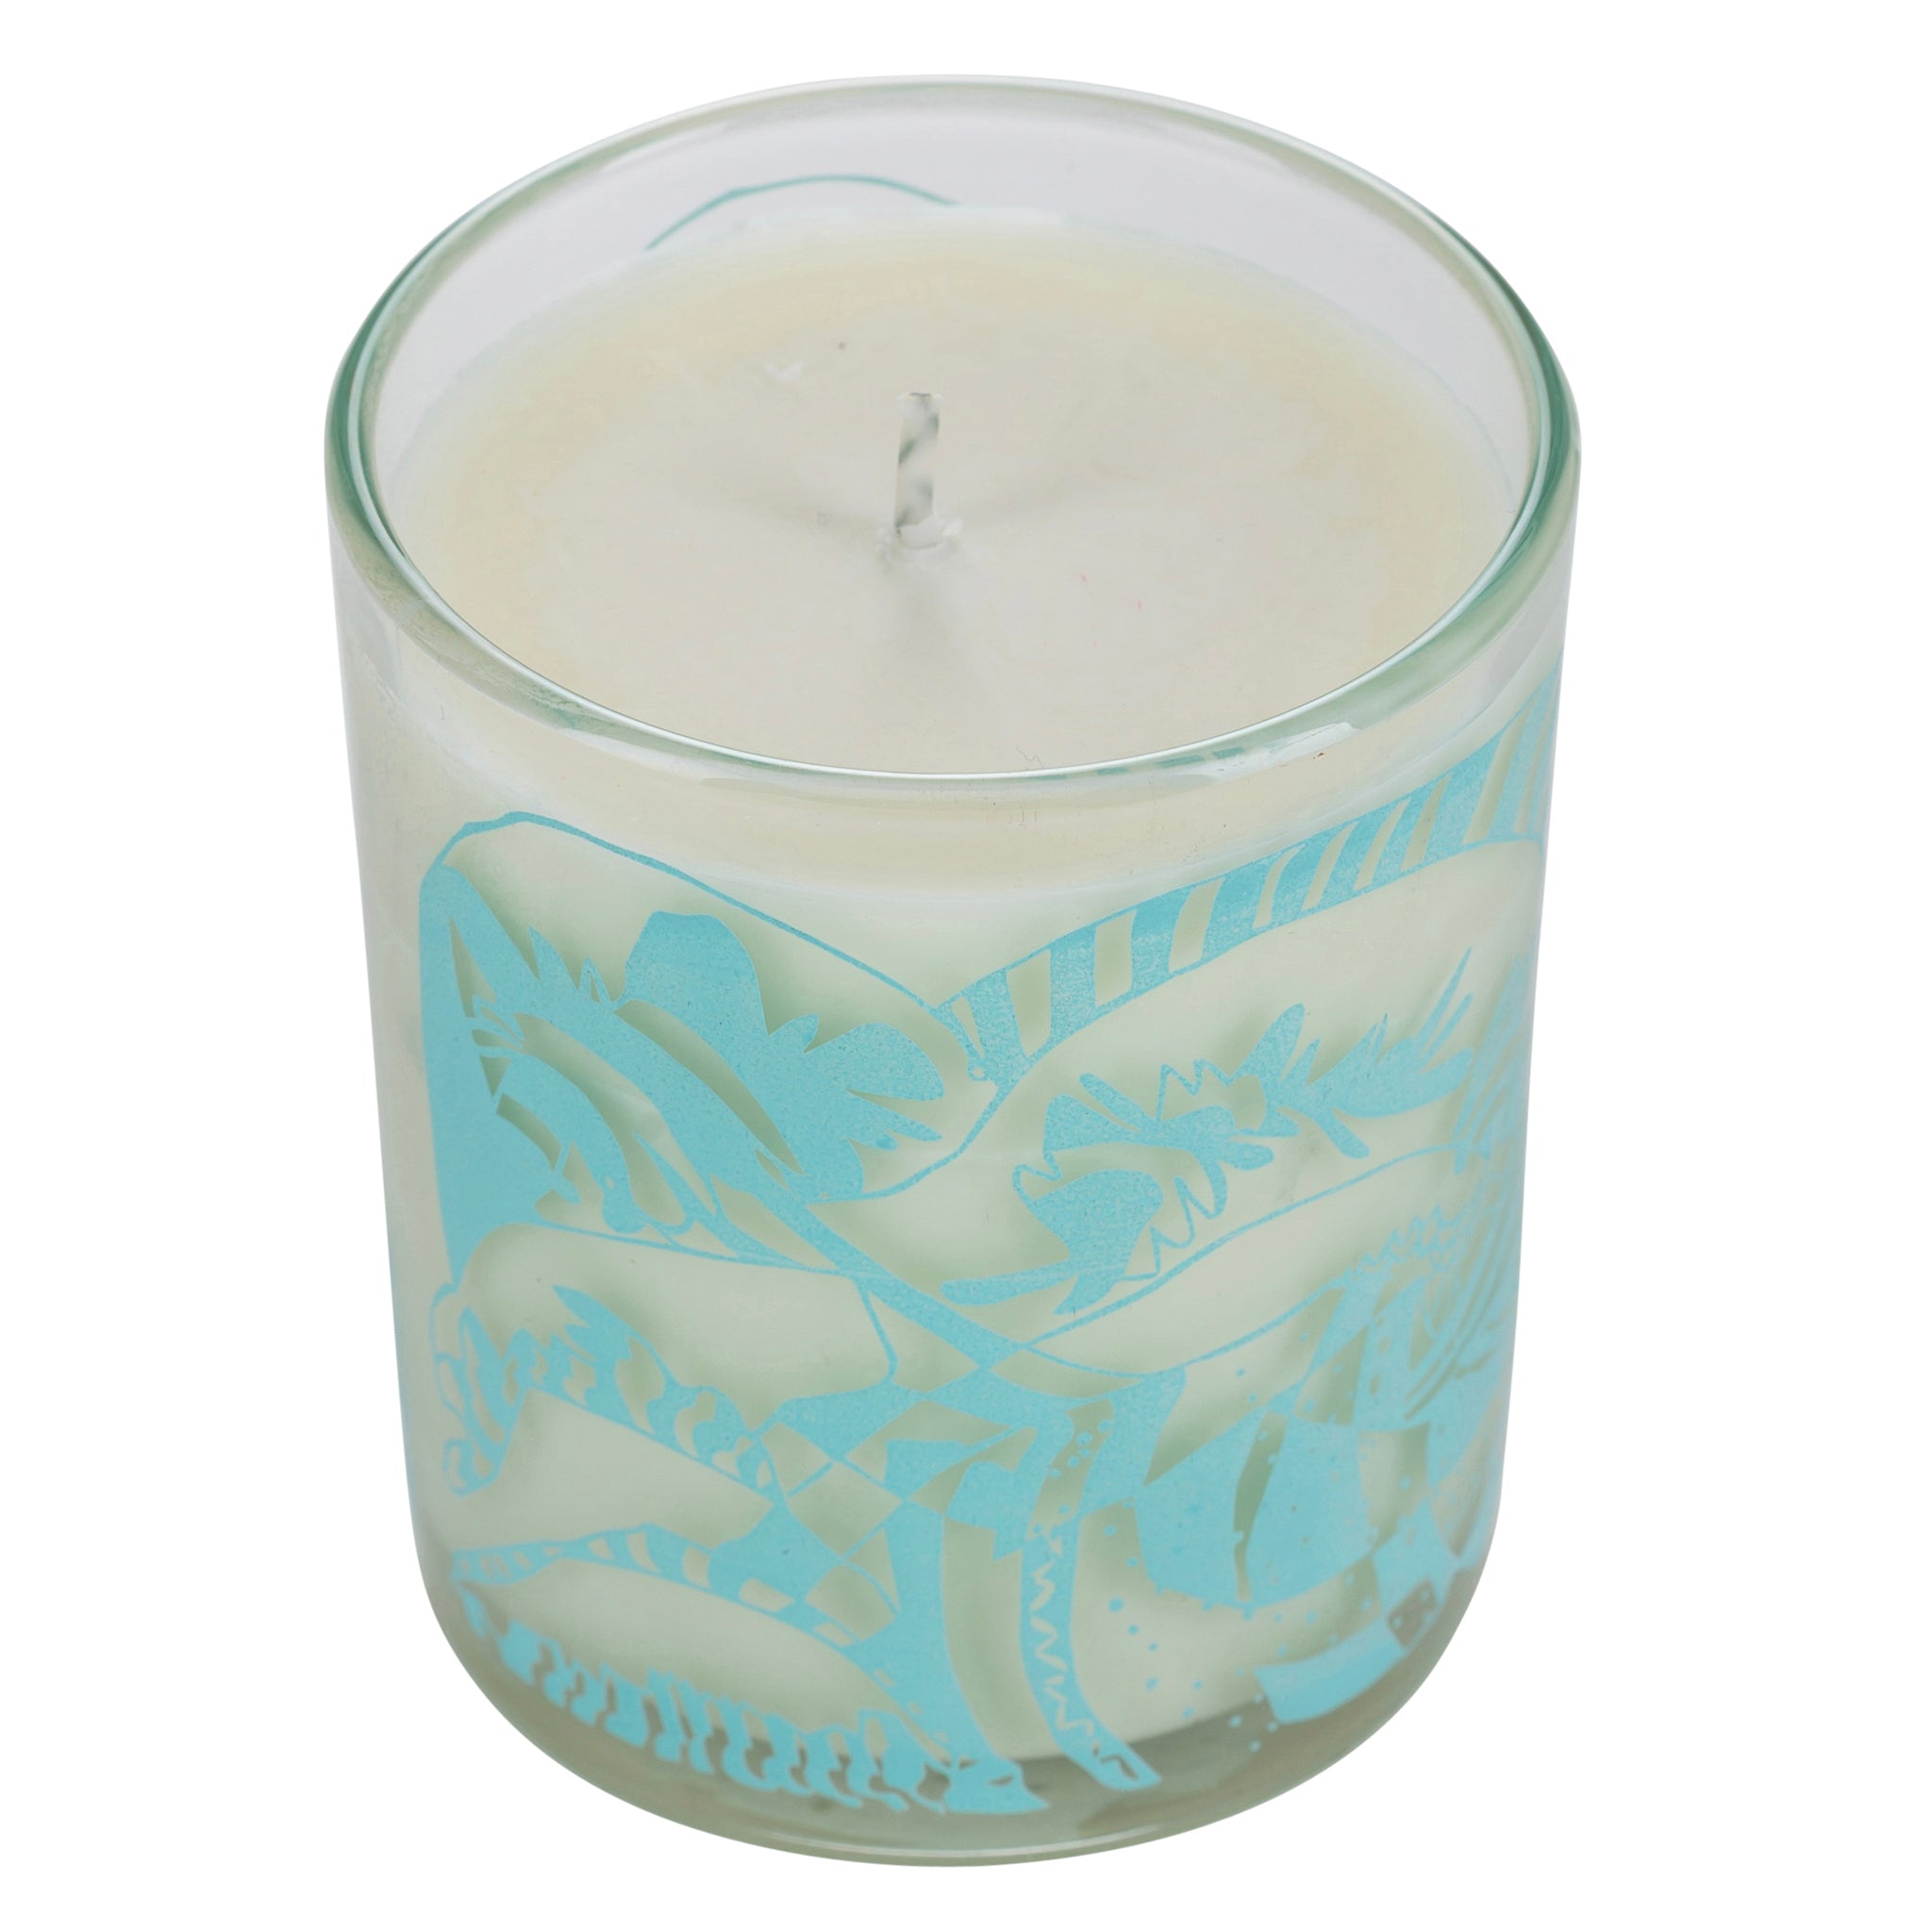 The Wave, Black Pomegranate Splash Scented Plant Wax Candle, candle only